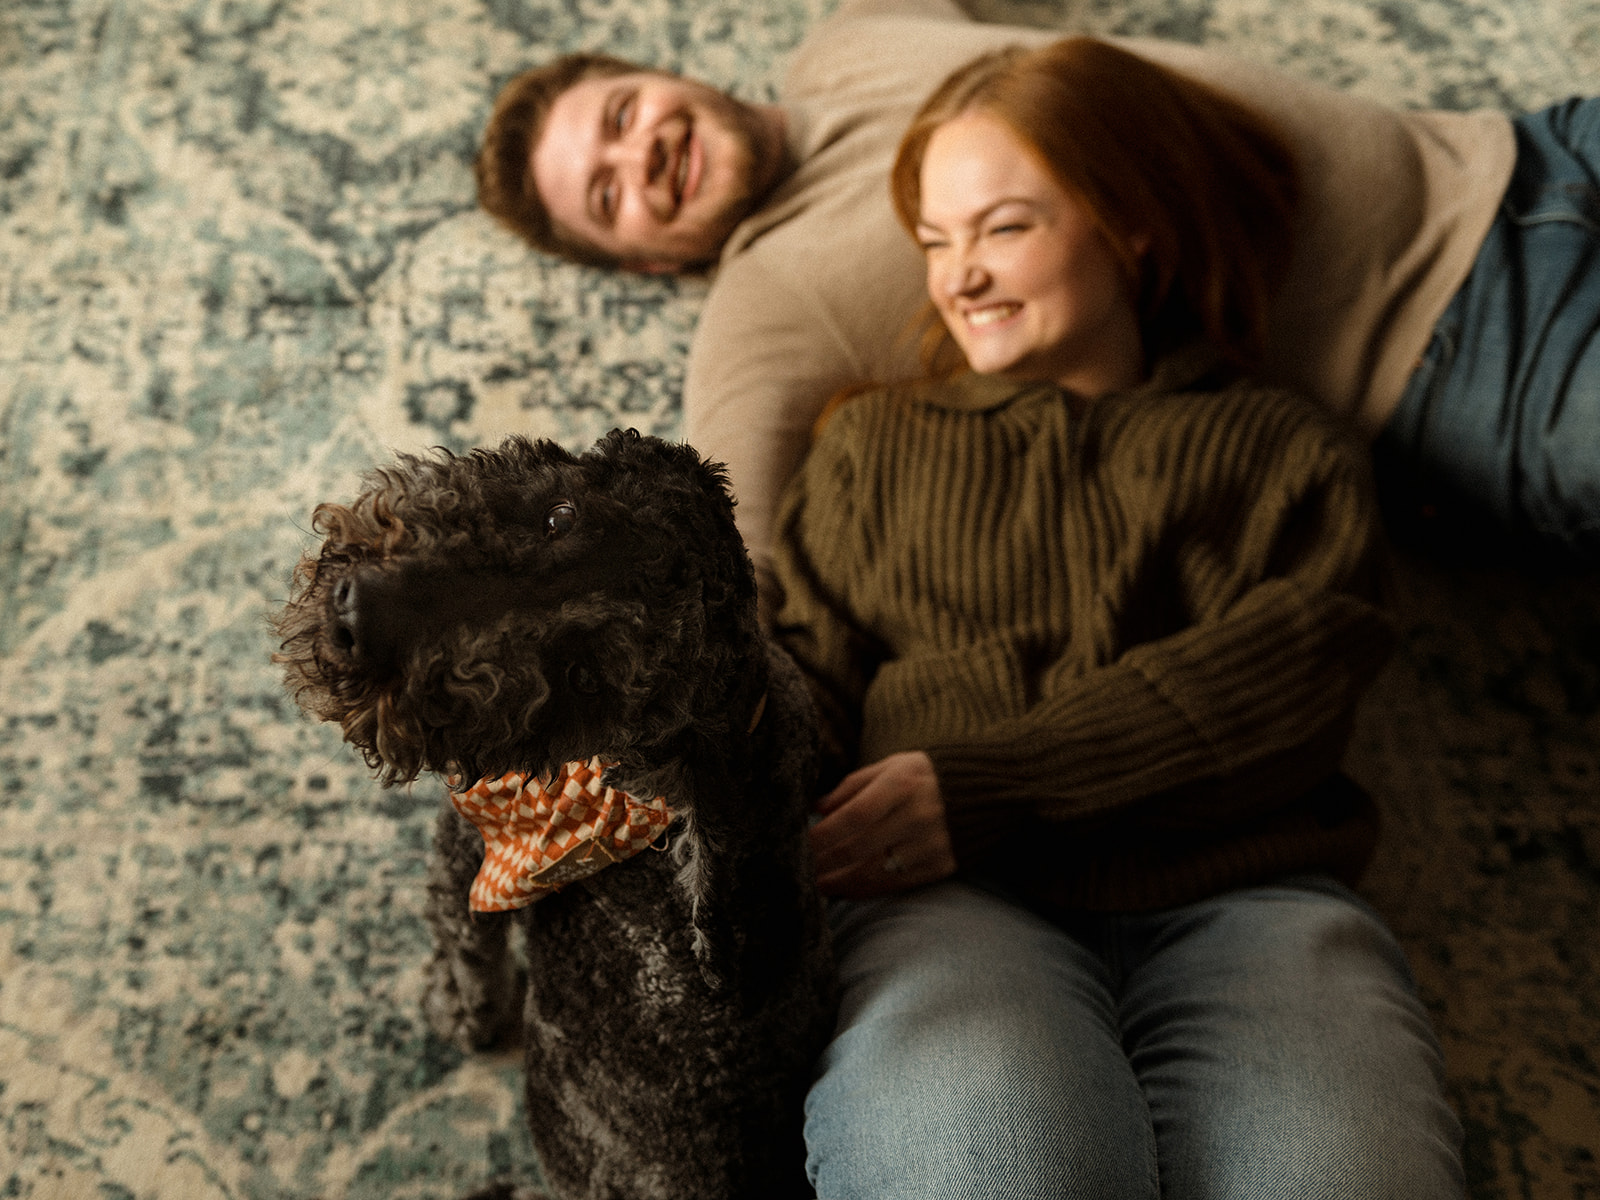 In-home couples session with their fur babies!